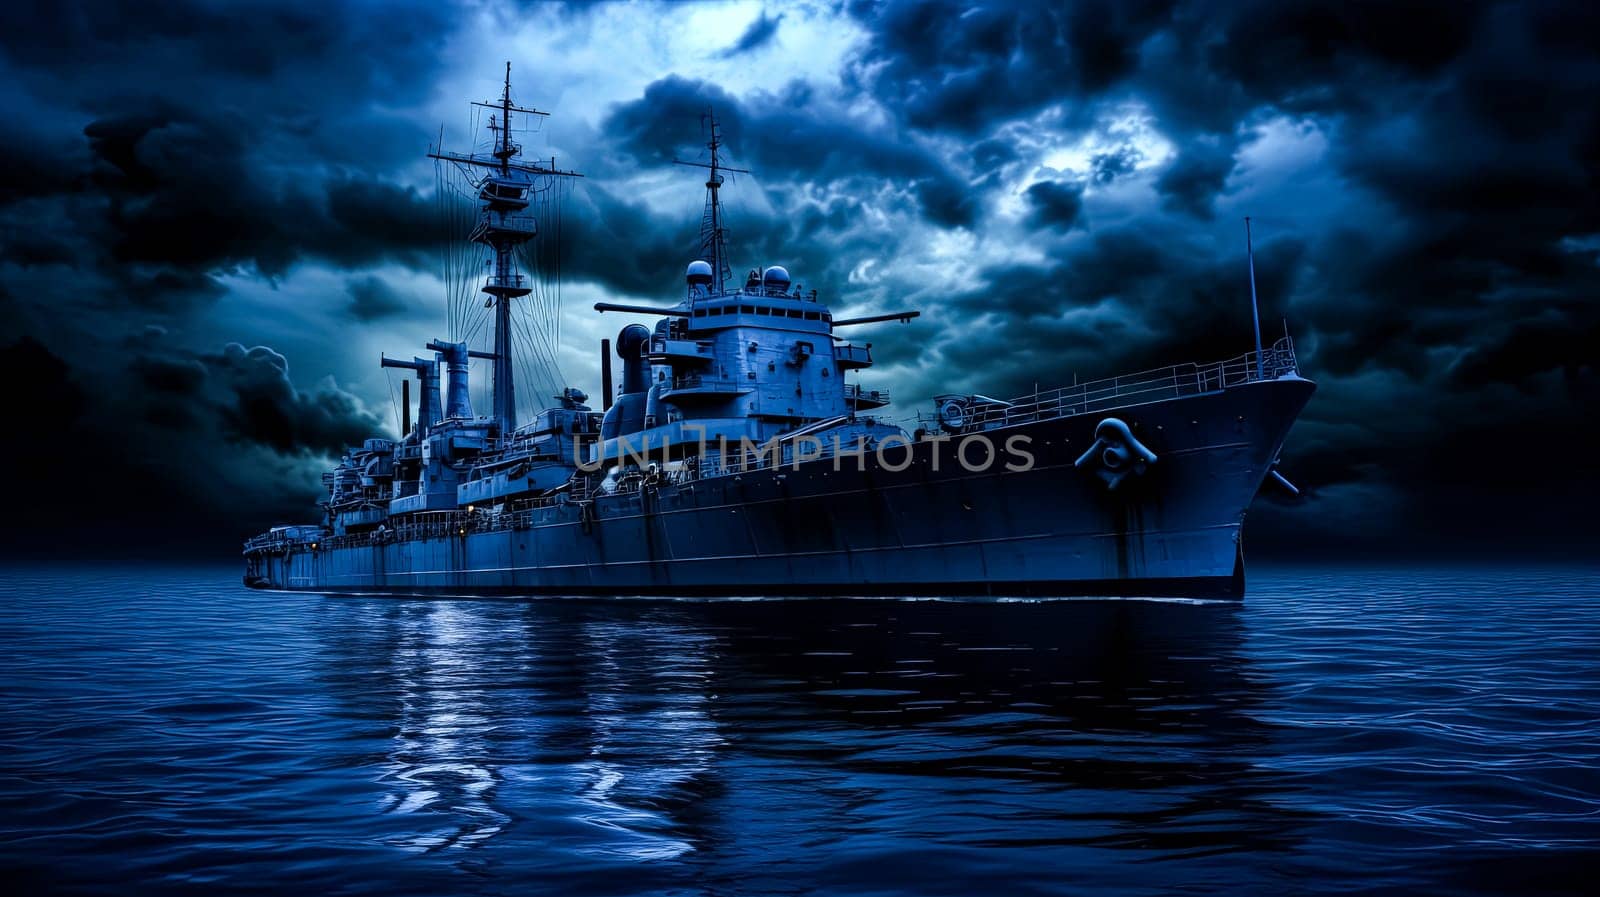 A large ship is in the water with a dark sky in the background. Scene is mysterious and ominous